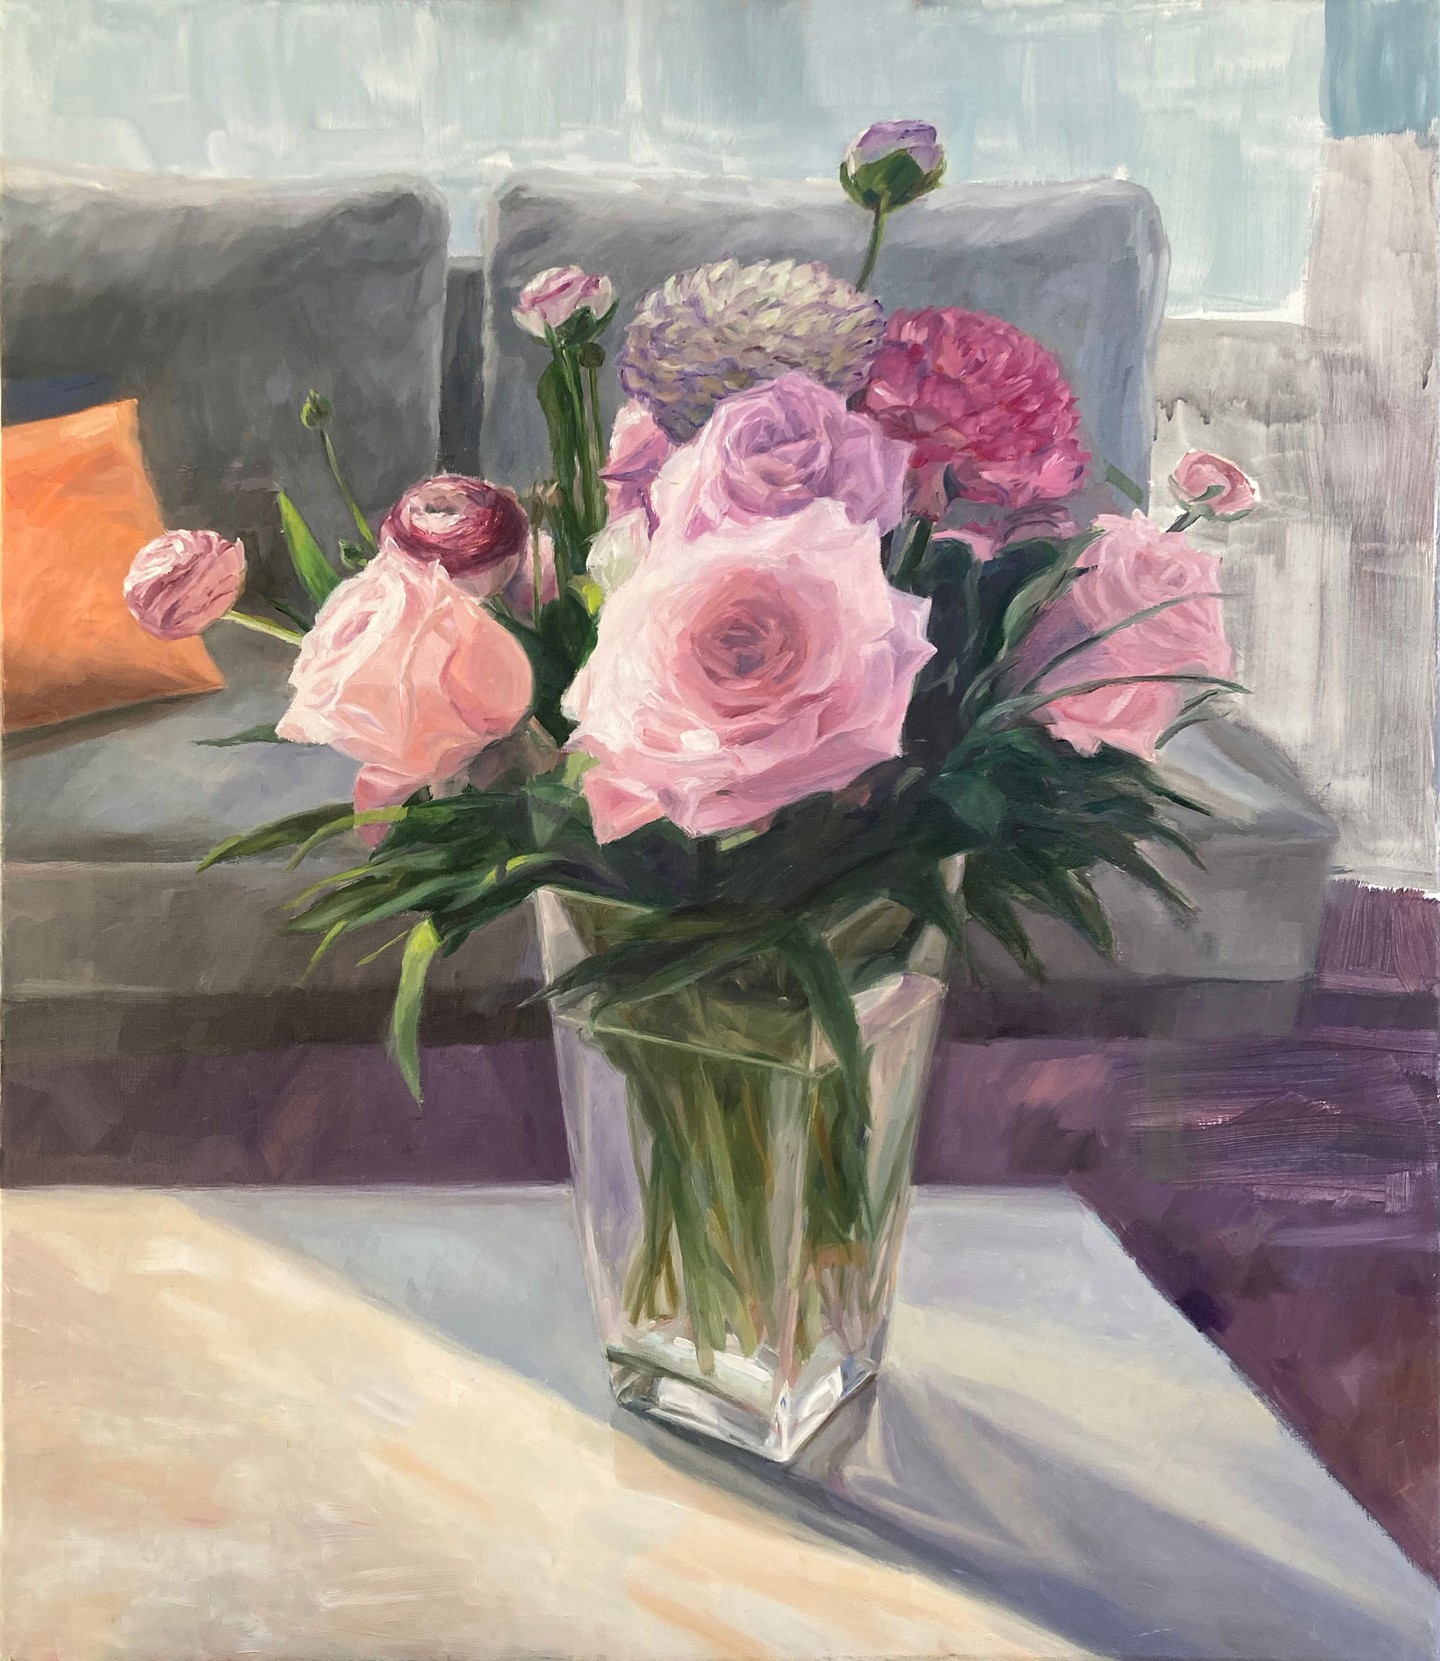 Pink roses and ranunculus in gals vase on a table